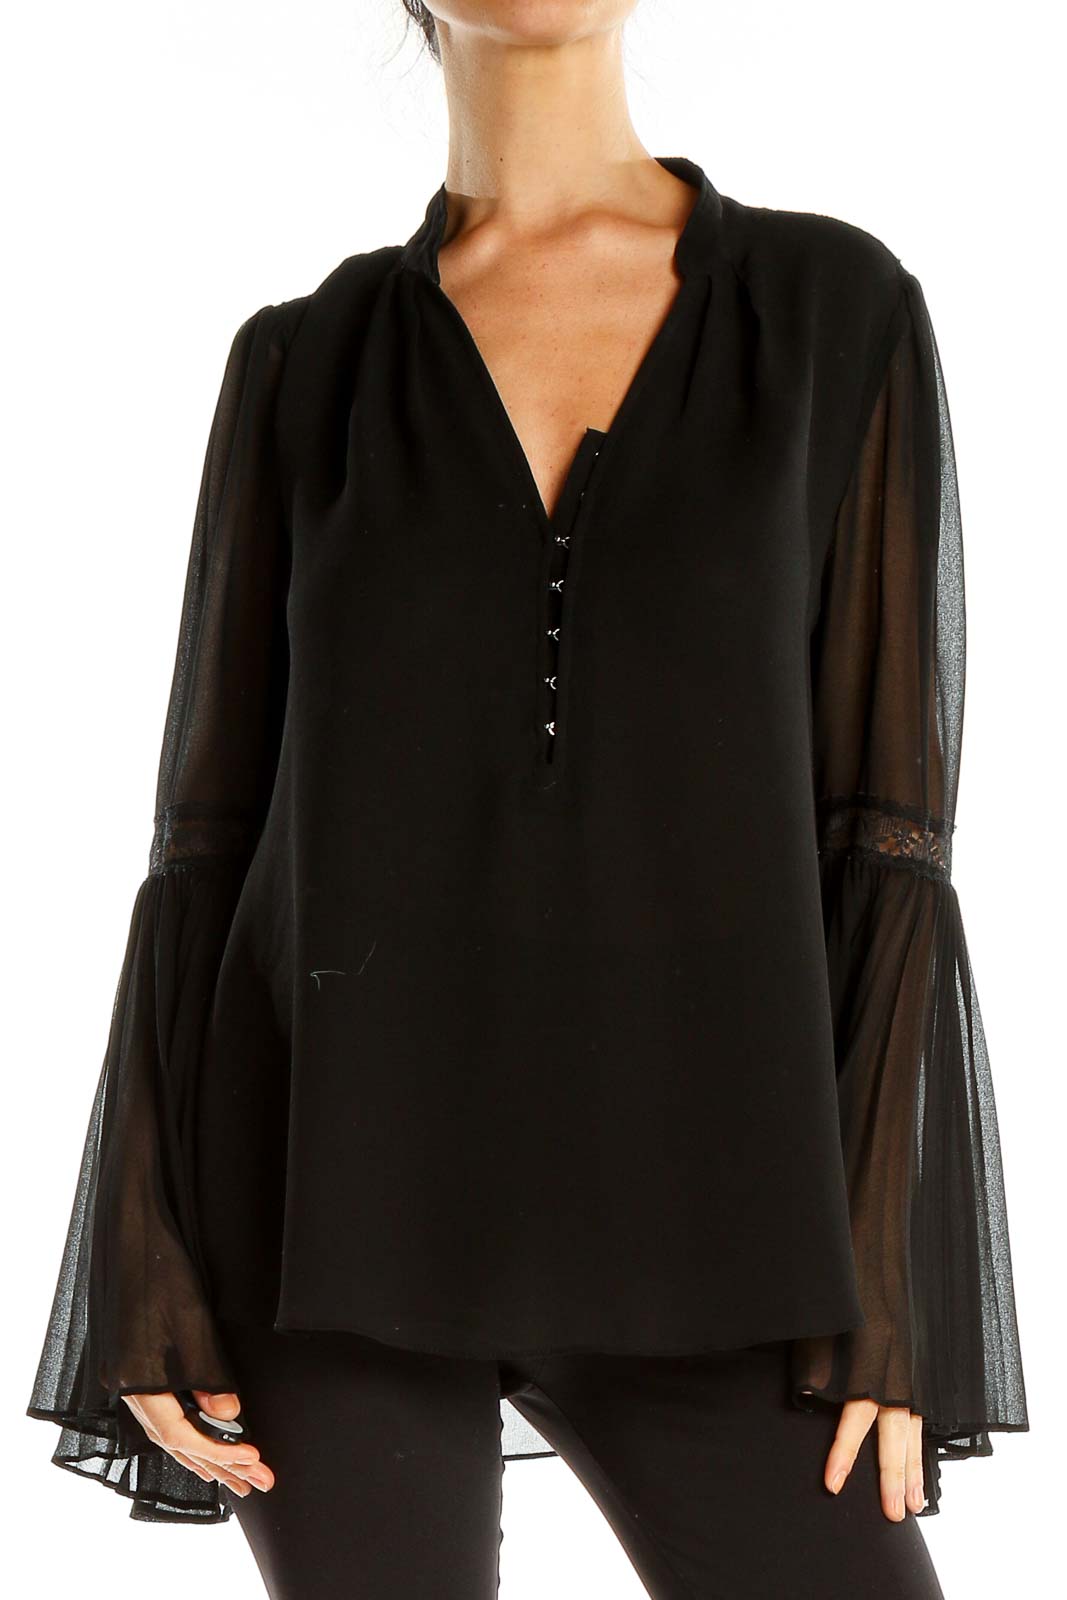 Black Pleated Sleeve Hook and Eye Closure Chic Blouse Front